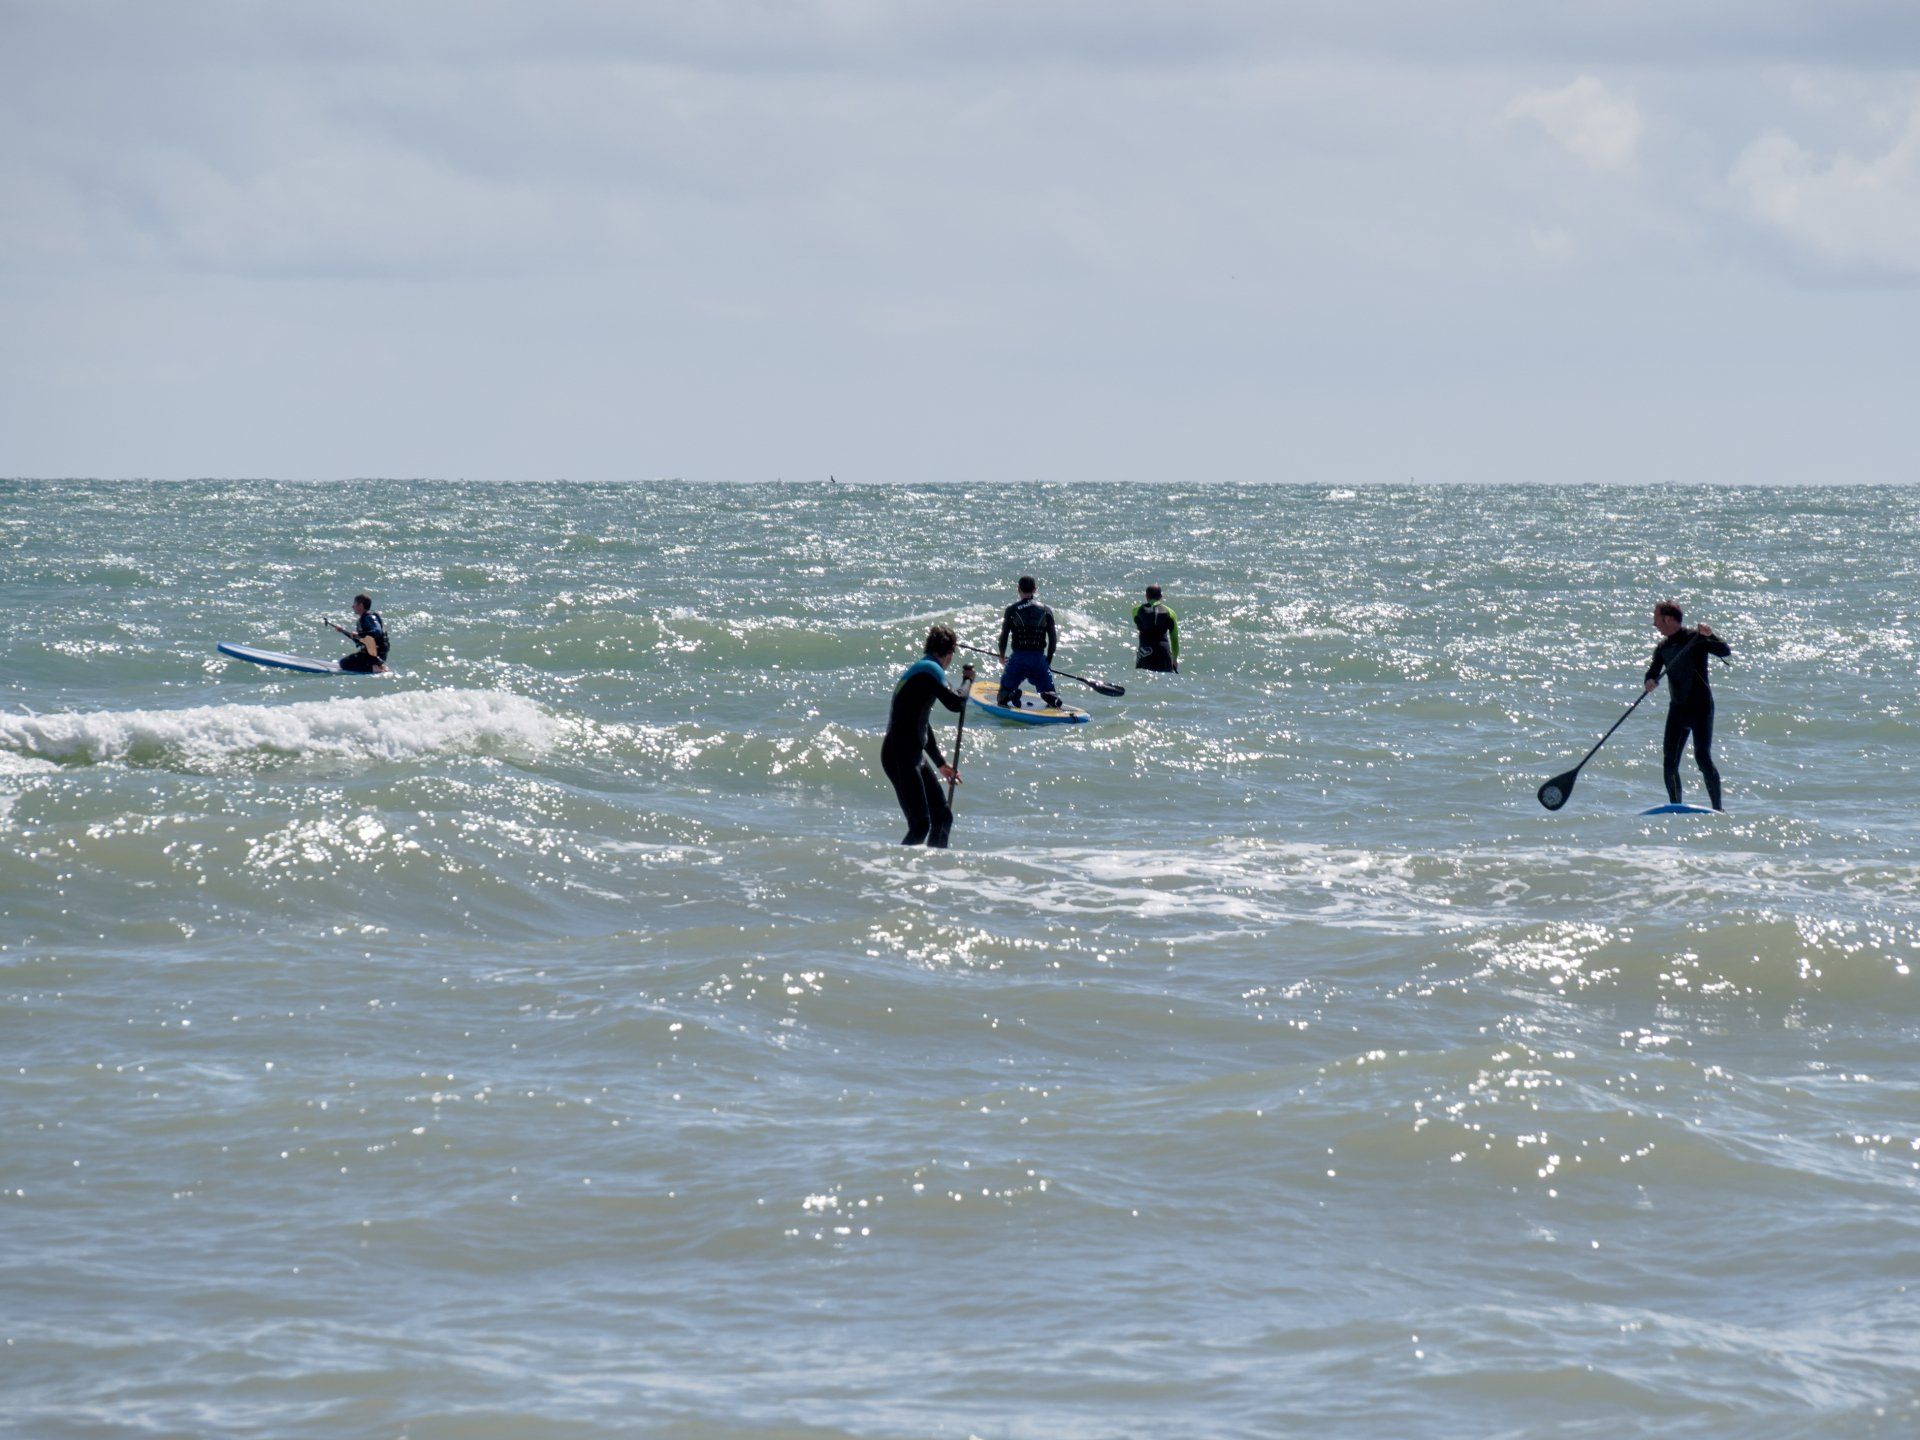 Photo of paddleboarders on the sea - Brighton, May 2014